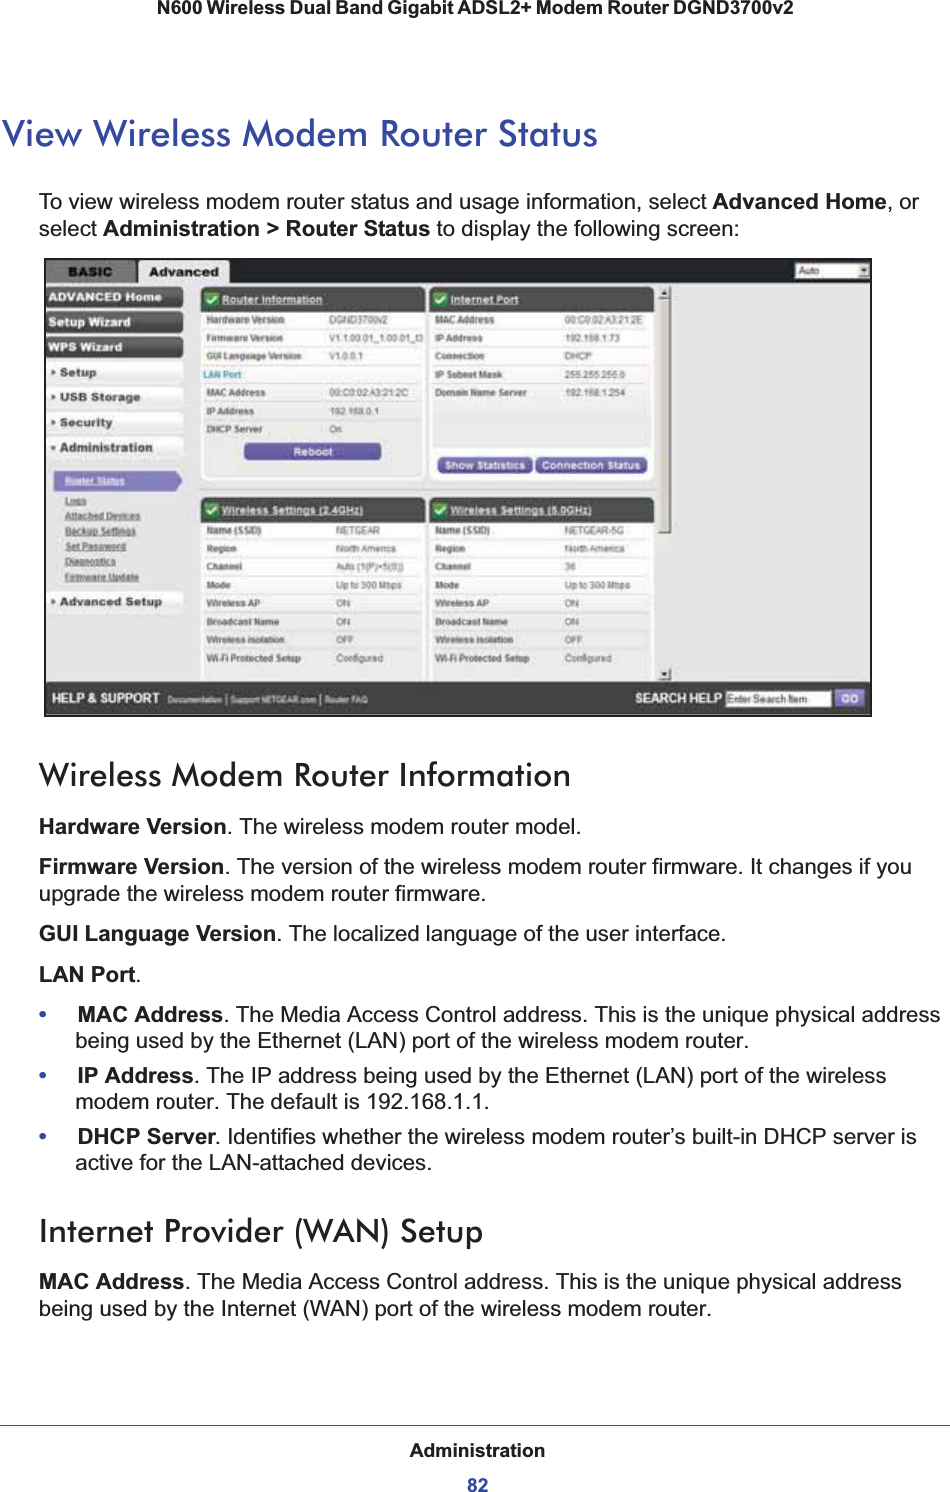 Administration82N600 Wireless Dual Band Gigabit ADSL2+ Modem Router DGND3700v2 View Wireless Modem Router StatusTo view wireless modem router status and usage information, select Advanced Home, or select Administration &gt; Router Status to display the following screen:Wireless Modem Router InformationHardware Version. The wireless modem router model.Firmware Version. The version of the wireless modem router firmware. It changes if you upgrade the wireless modem router firmware.GUI Language Version. The localized language of the user interface.LAN Port.•MAC Address. The Media Access Control address. This is the unique physical address being used by the Ethernet (LAN) port of the wireless modem router. •IP Address. The IP address being used by the Ethernet (LAN) port of the wireless modem router. The default is 192.168.1.1.•DHCP Server. Identifies whether the wireless modem router’s built-in DHCP server is active for the LAN-attached devices.Internet Provider (WAN) SetupMAC Address. The Media Access Control address. This is the unique physical address being used by the Internet (WAN) port of the wireless modem router.